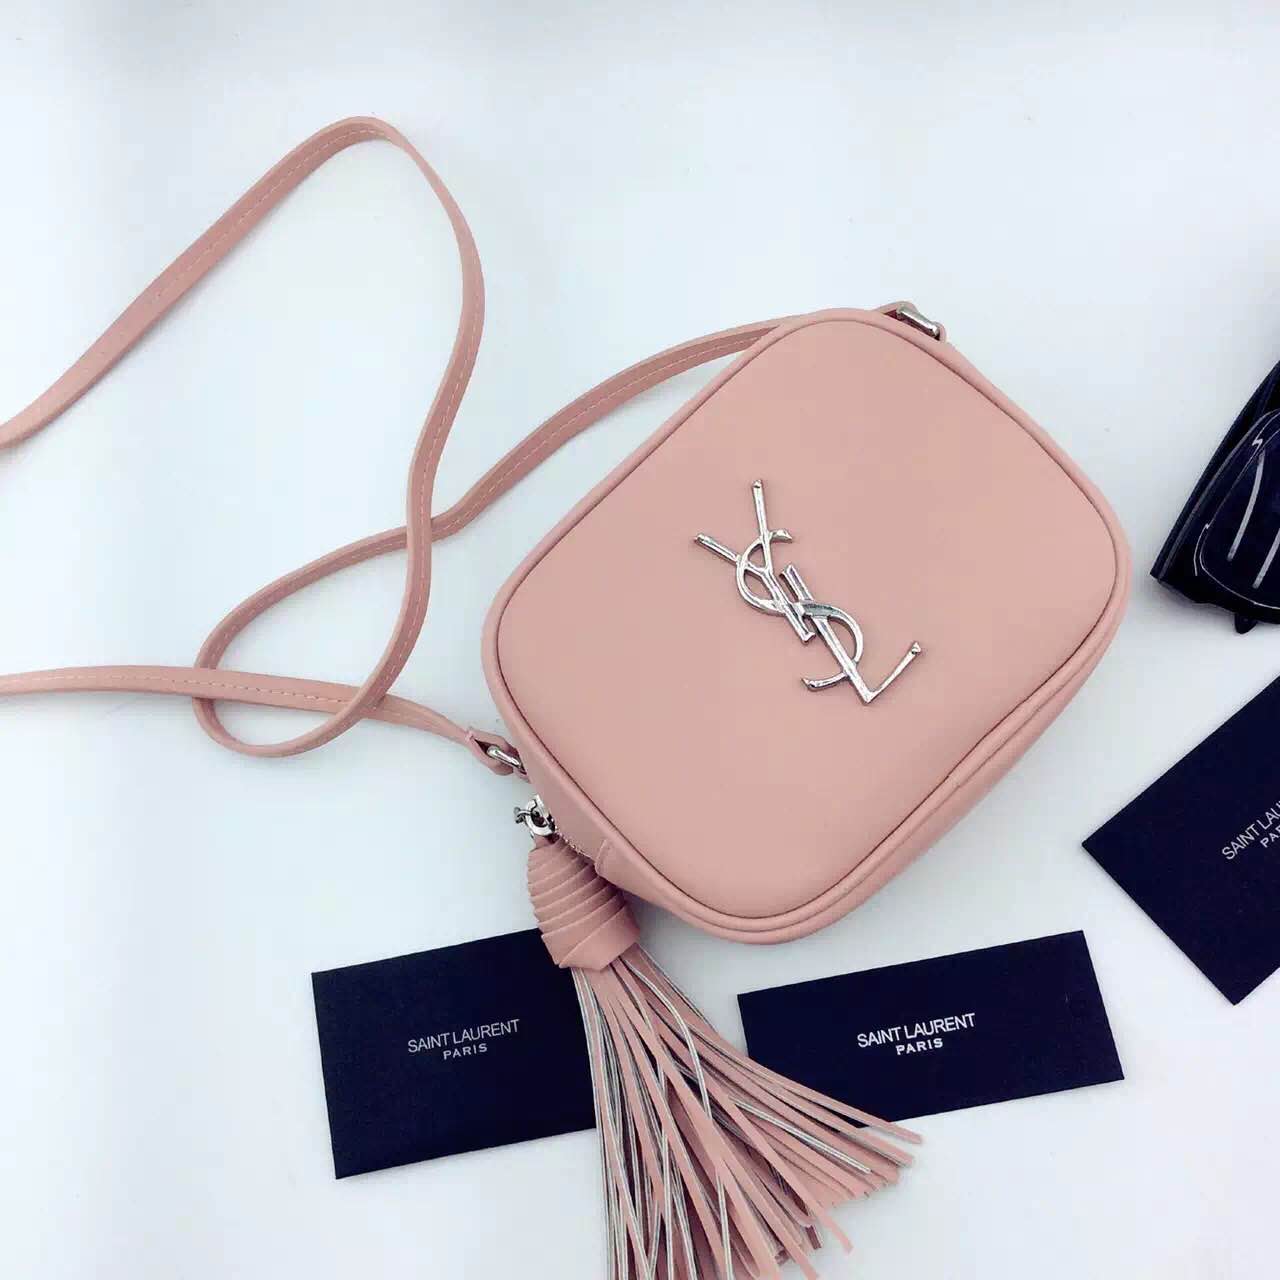 New Arrival!2016 Cheap YSL Out Sale with Free Shipping-Saint Laurent Monogram Medium Blogger Bag in Pink Leather